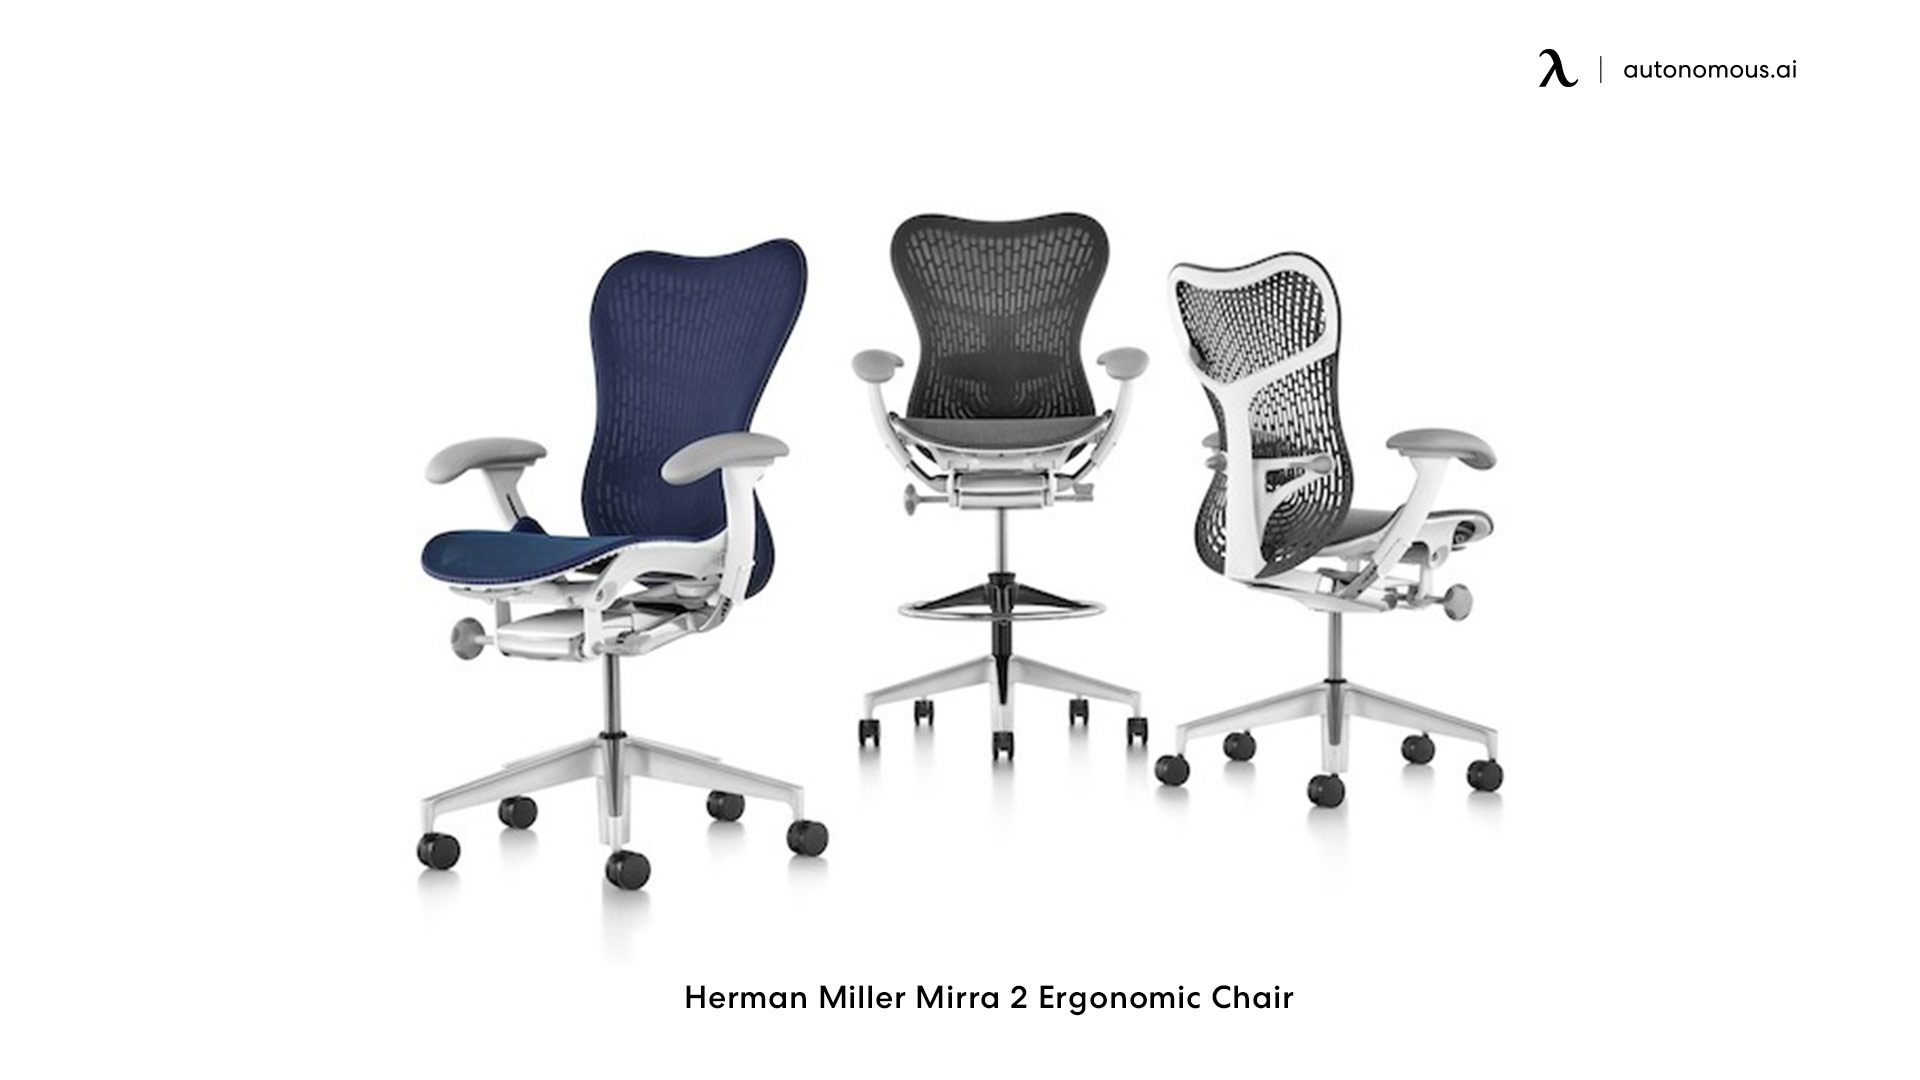 Herman Miller Mirra 2 office chairs with arms